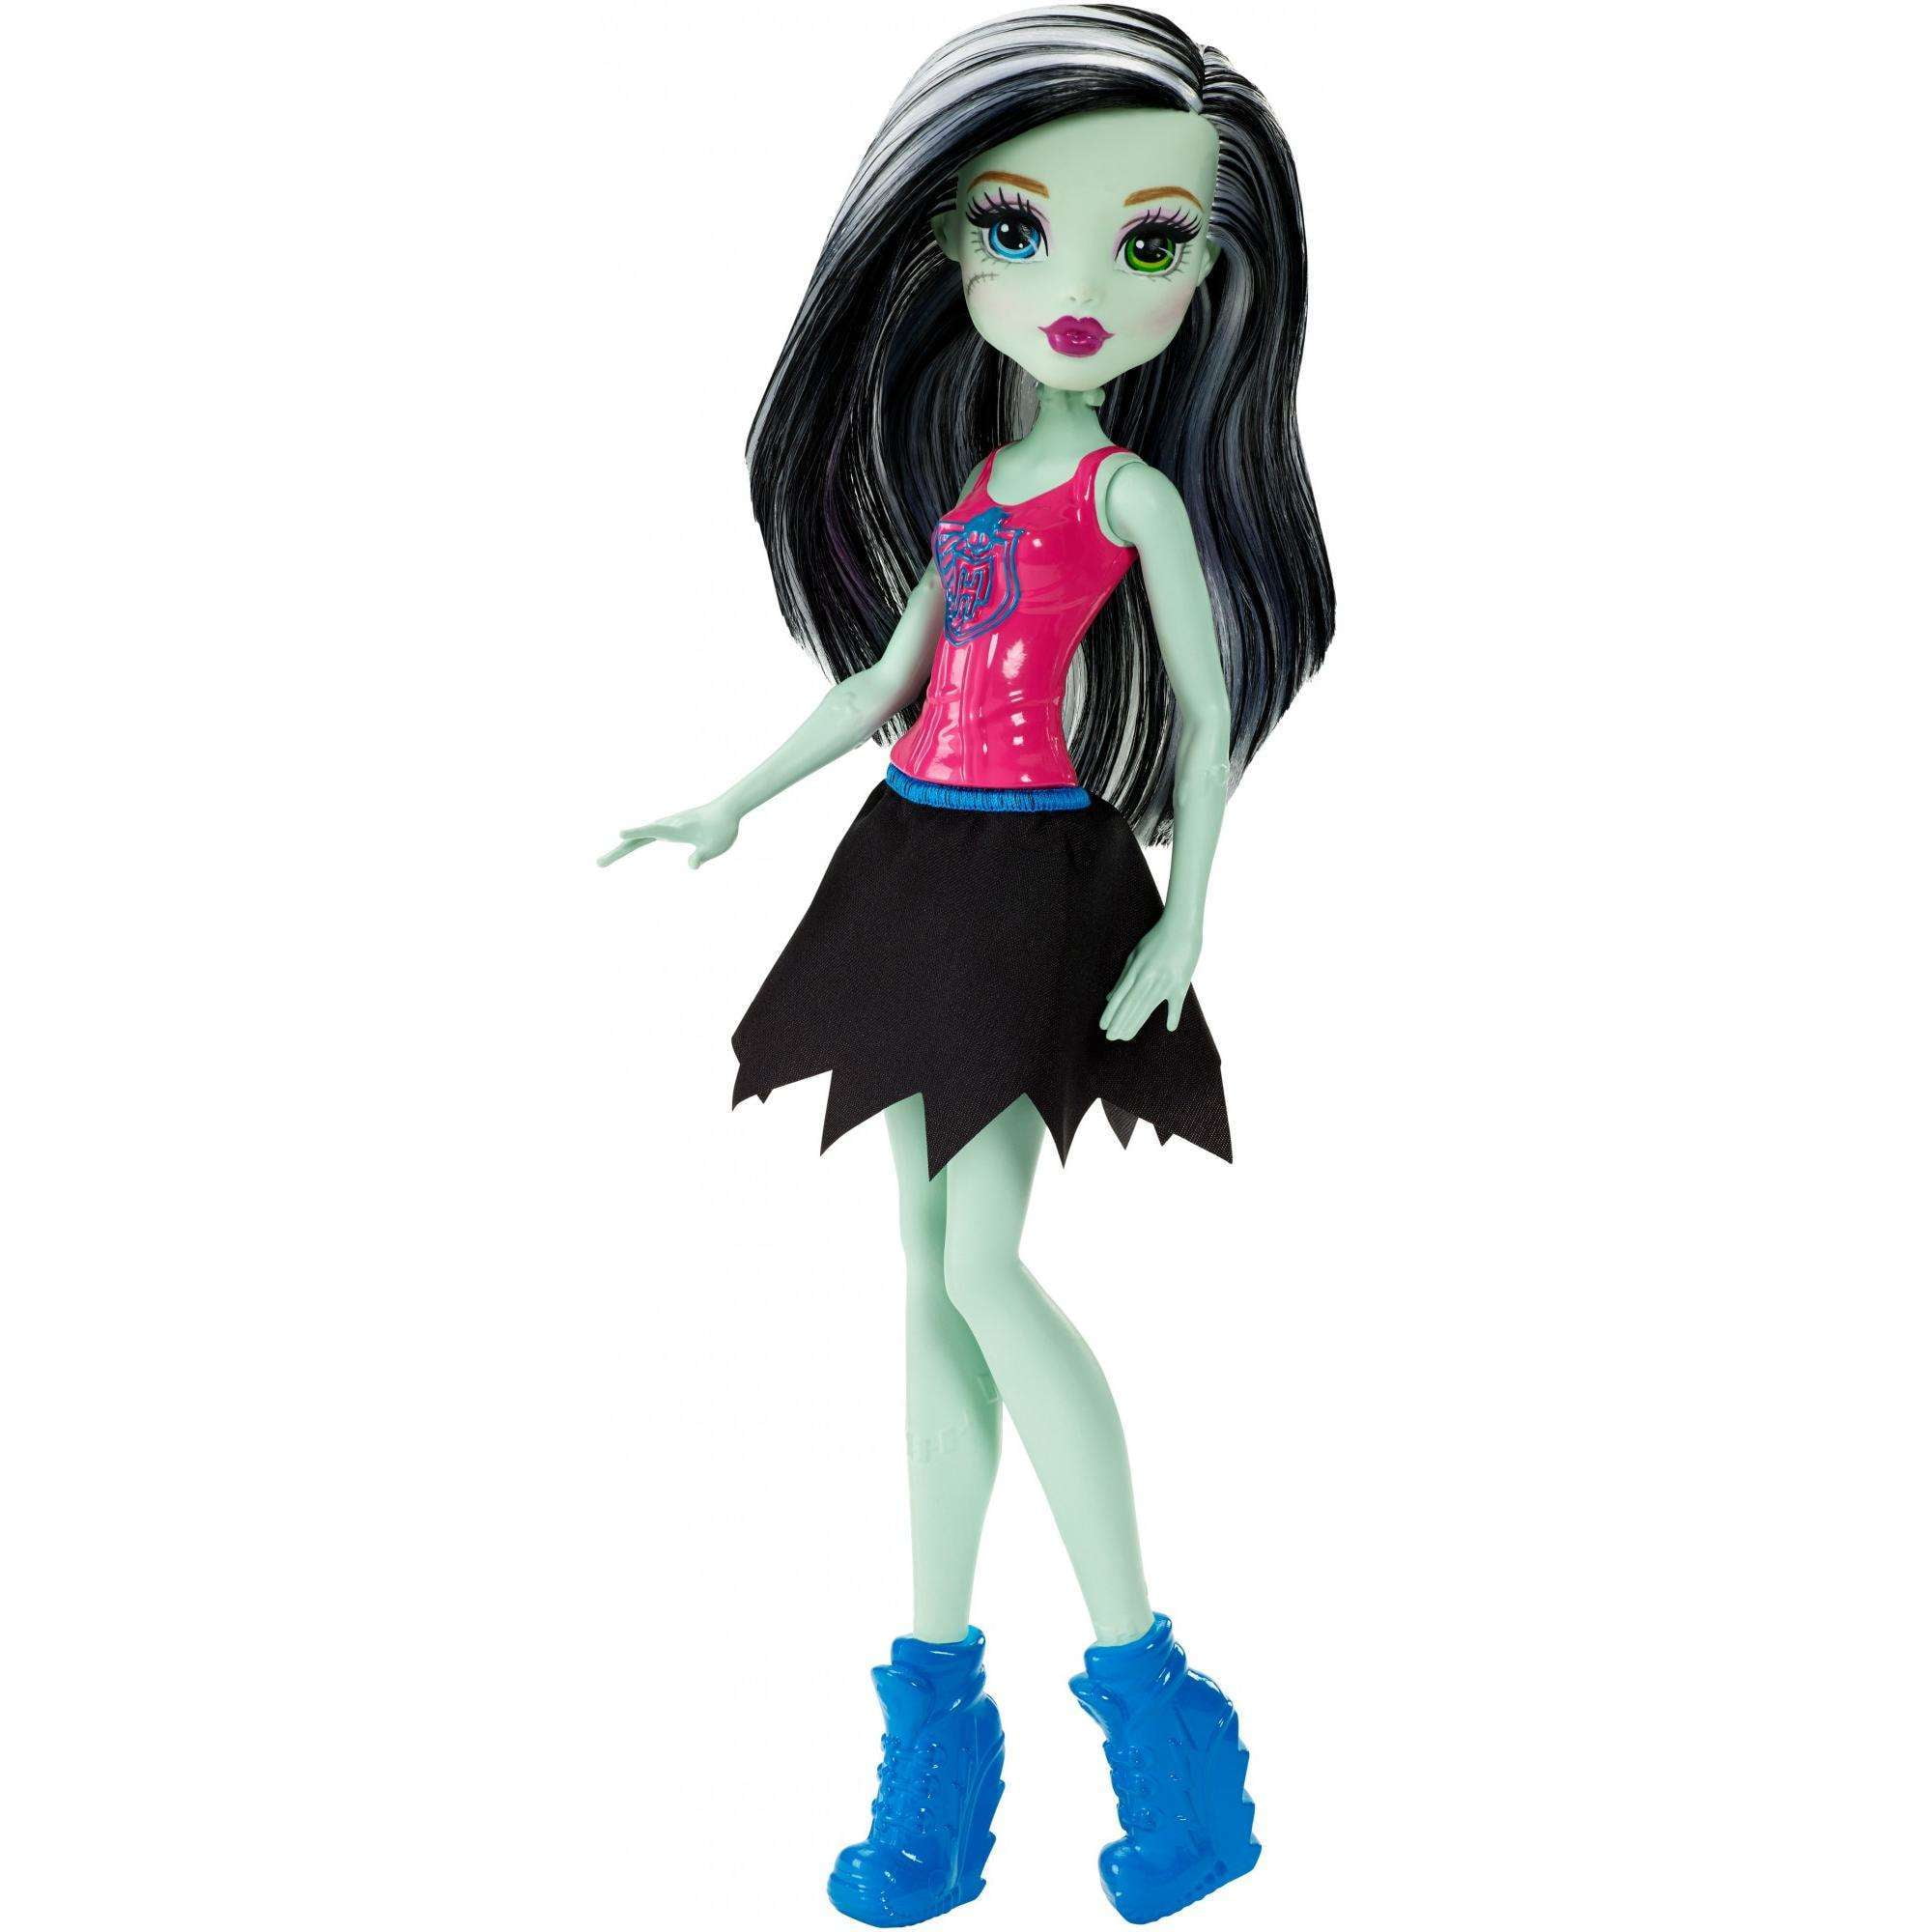 Monster High Clawdeen's Day Out Doll, MTHKY72